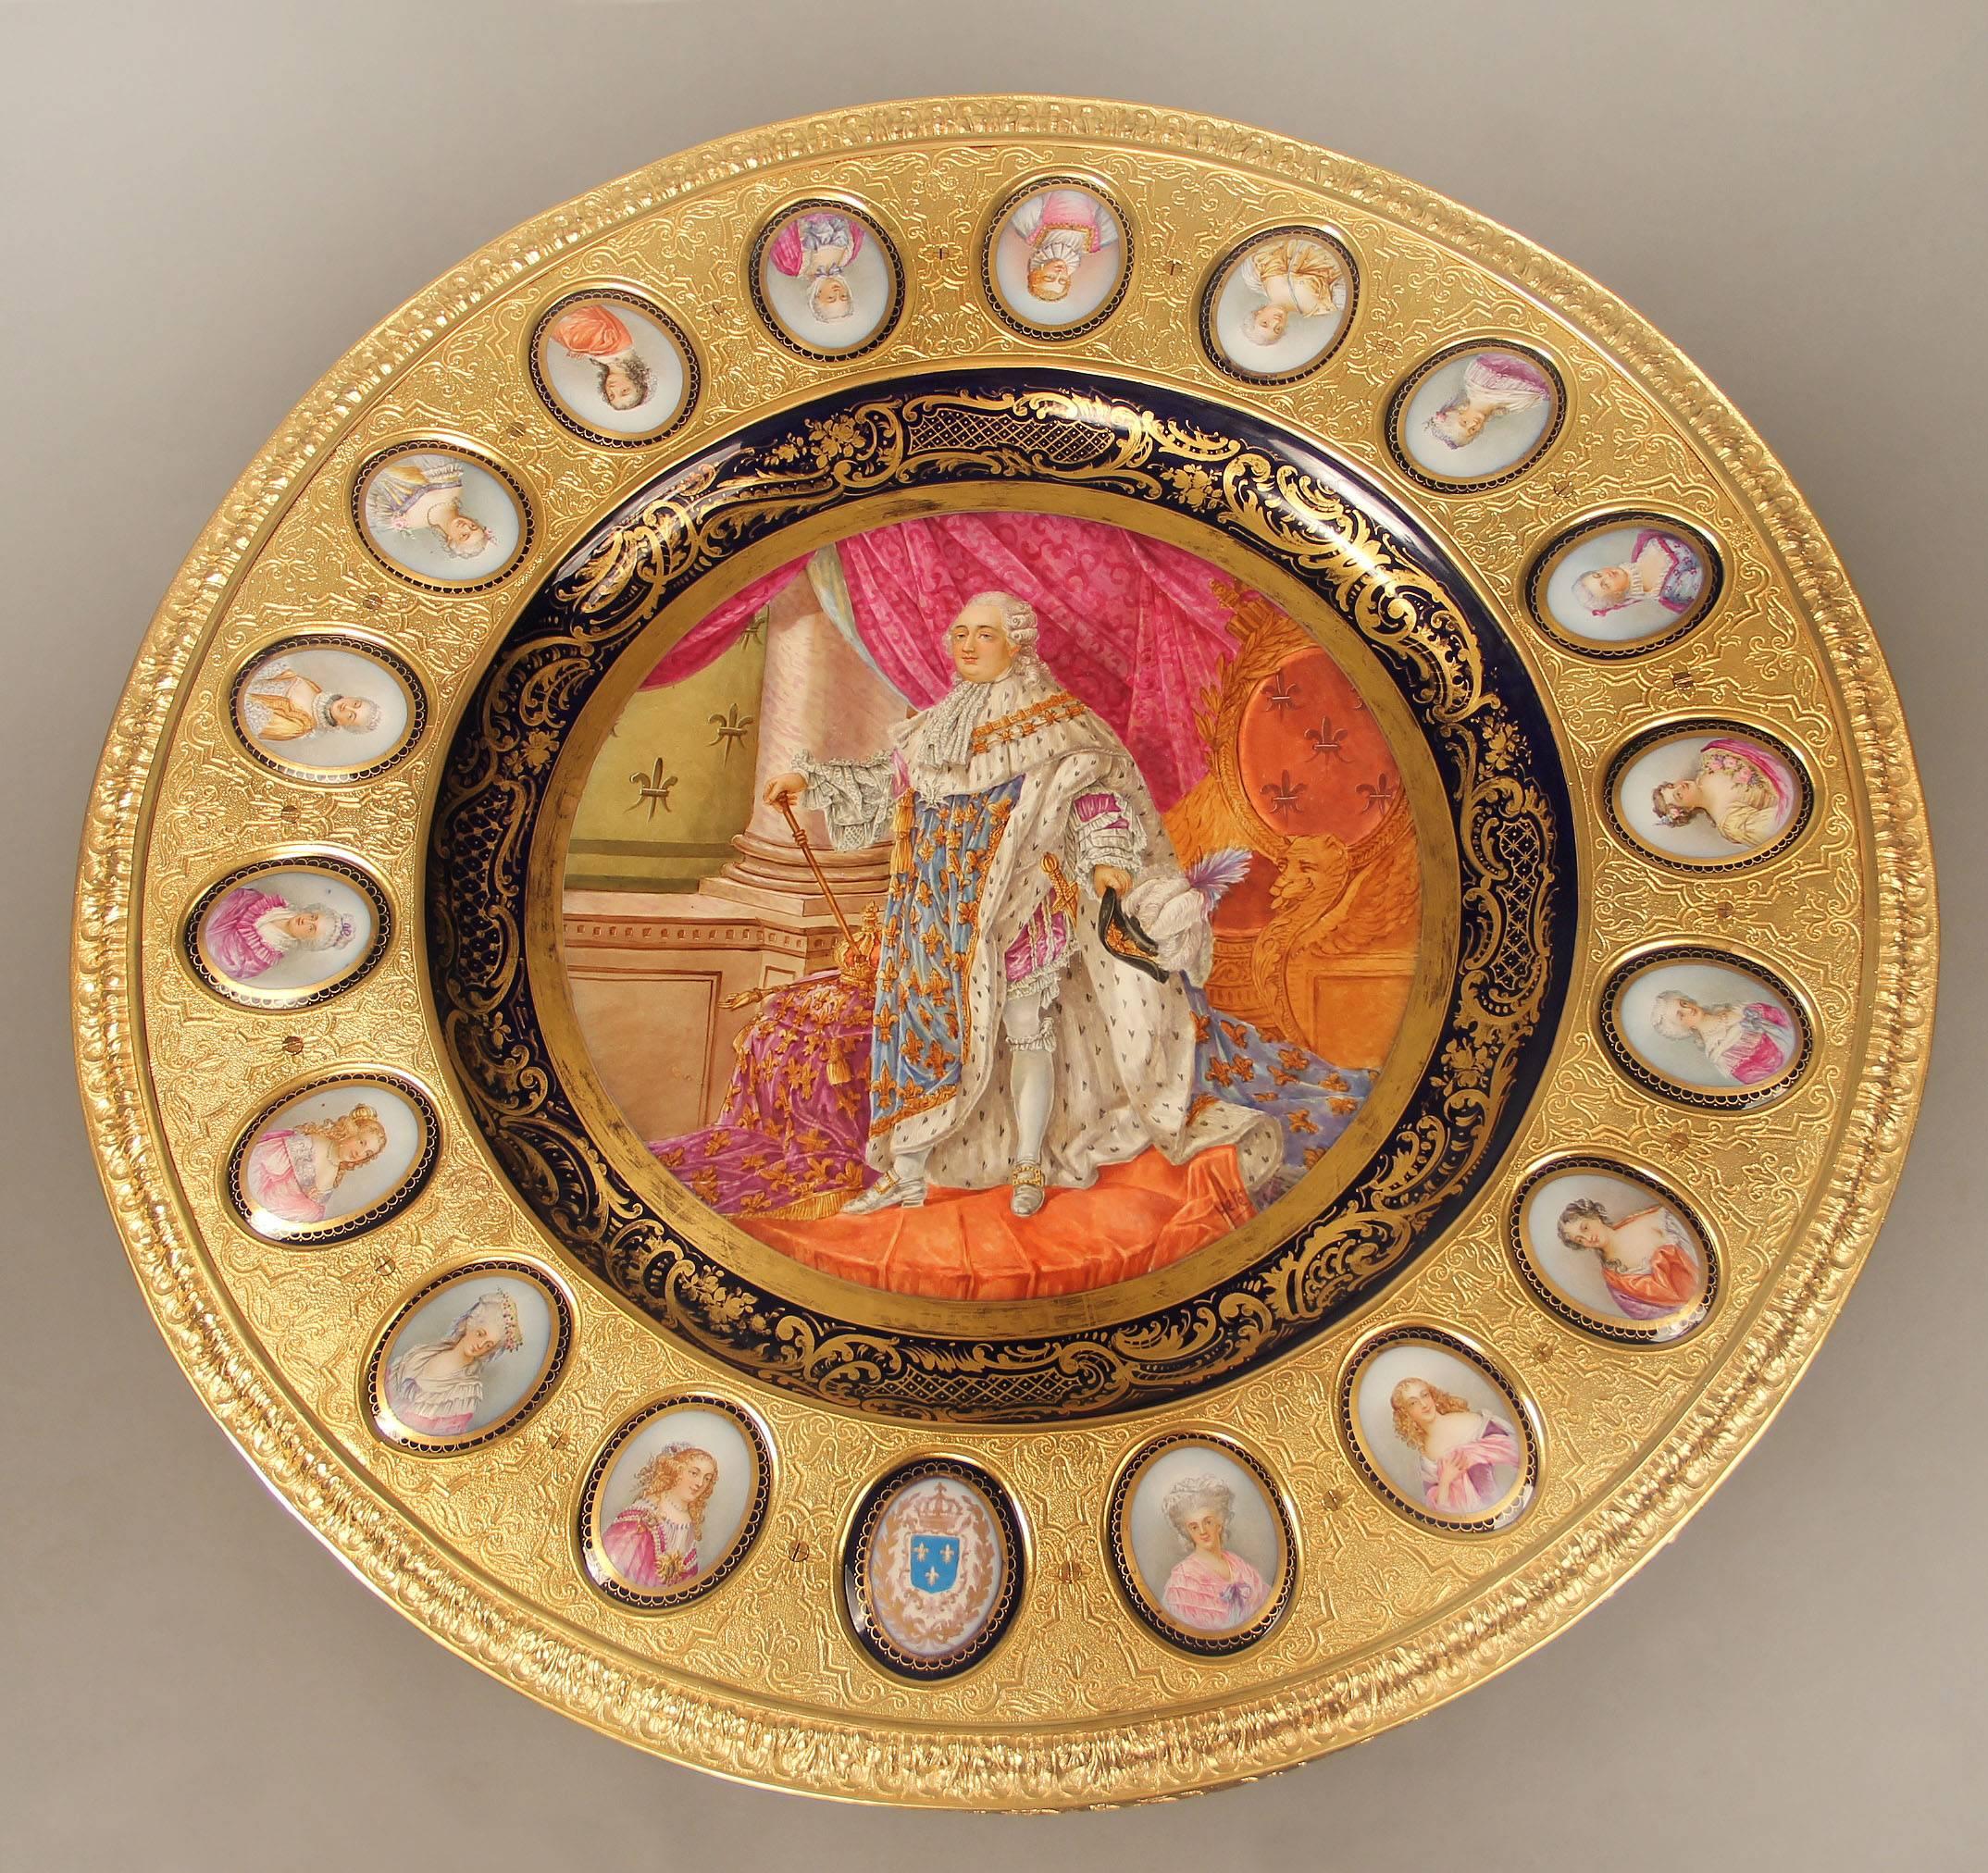 A beautiful late 19th century gilt bronze mounted Sèvres style porcelain centre table

The top centered with a large round plaque of Louis XVI in royal dress attire, surrounded by 18 oval plaques of the ladies of his court, sitting on a gilt